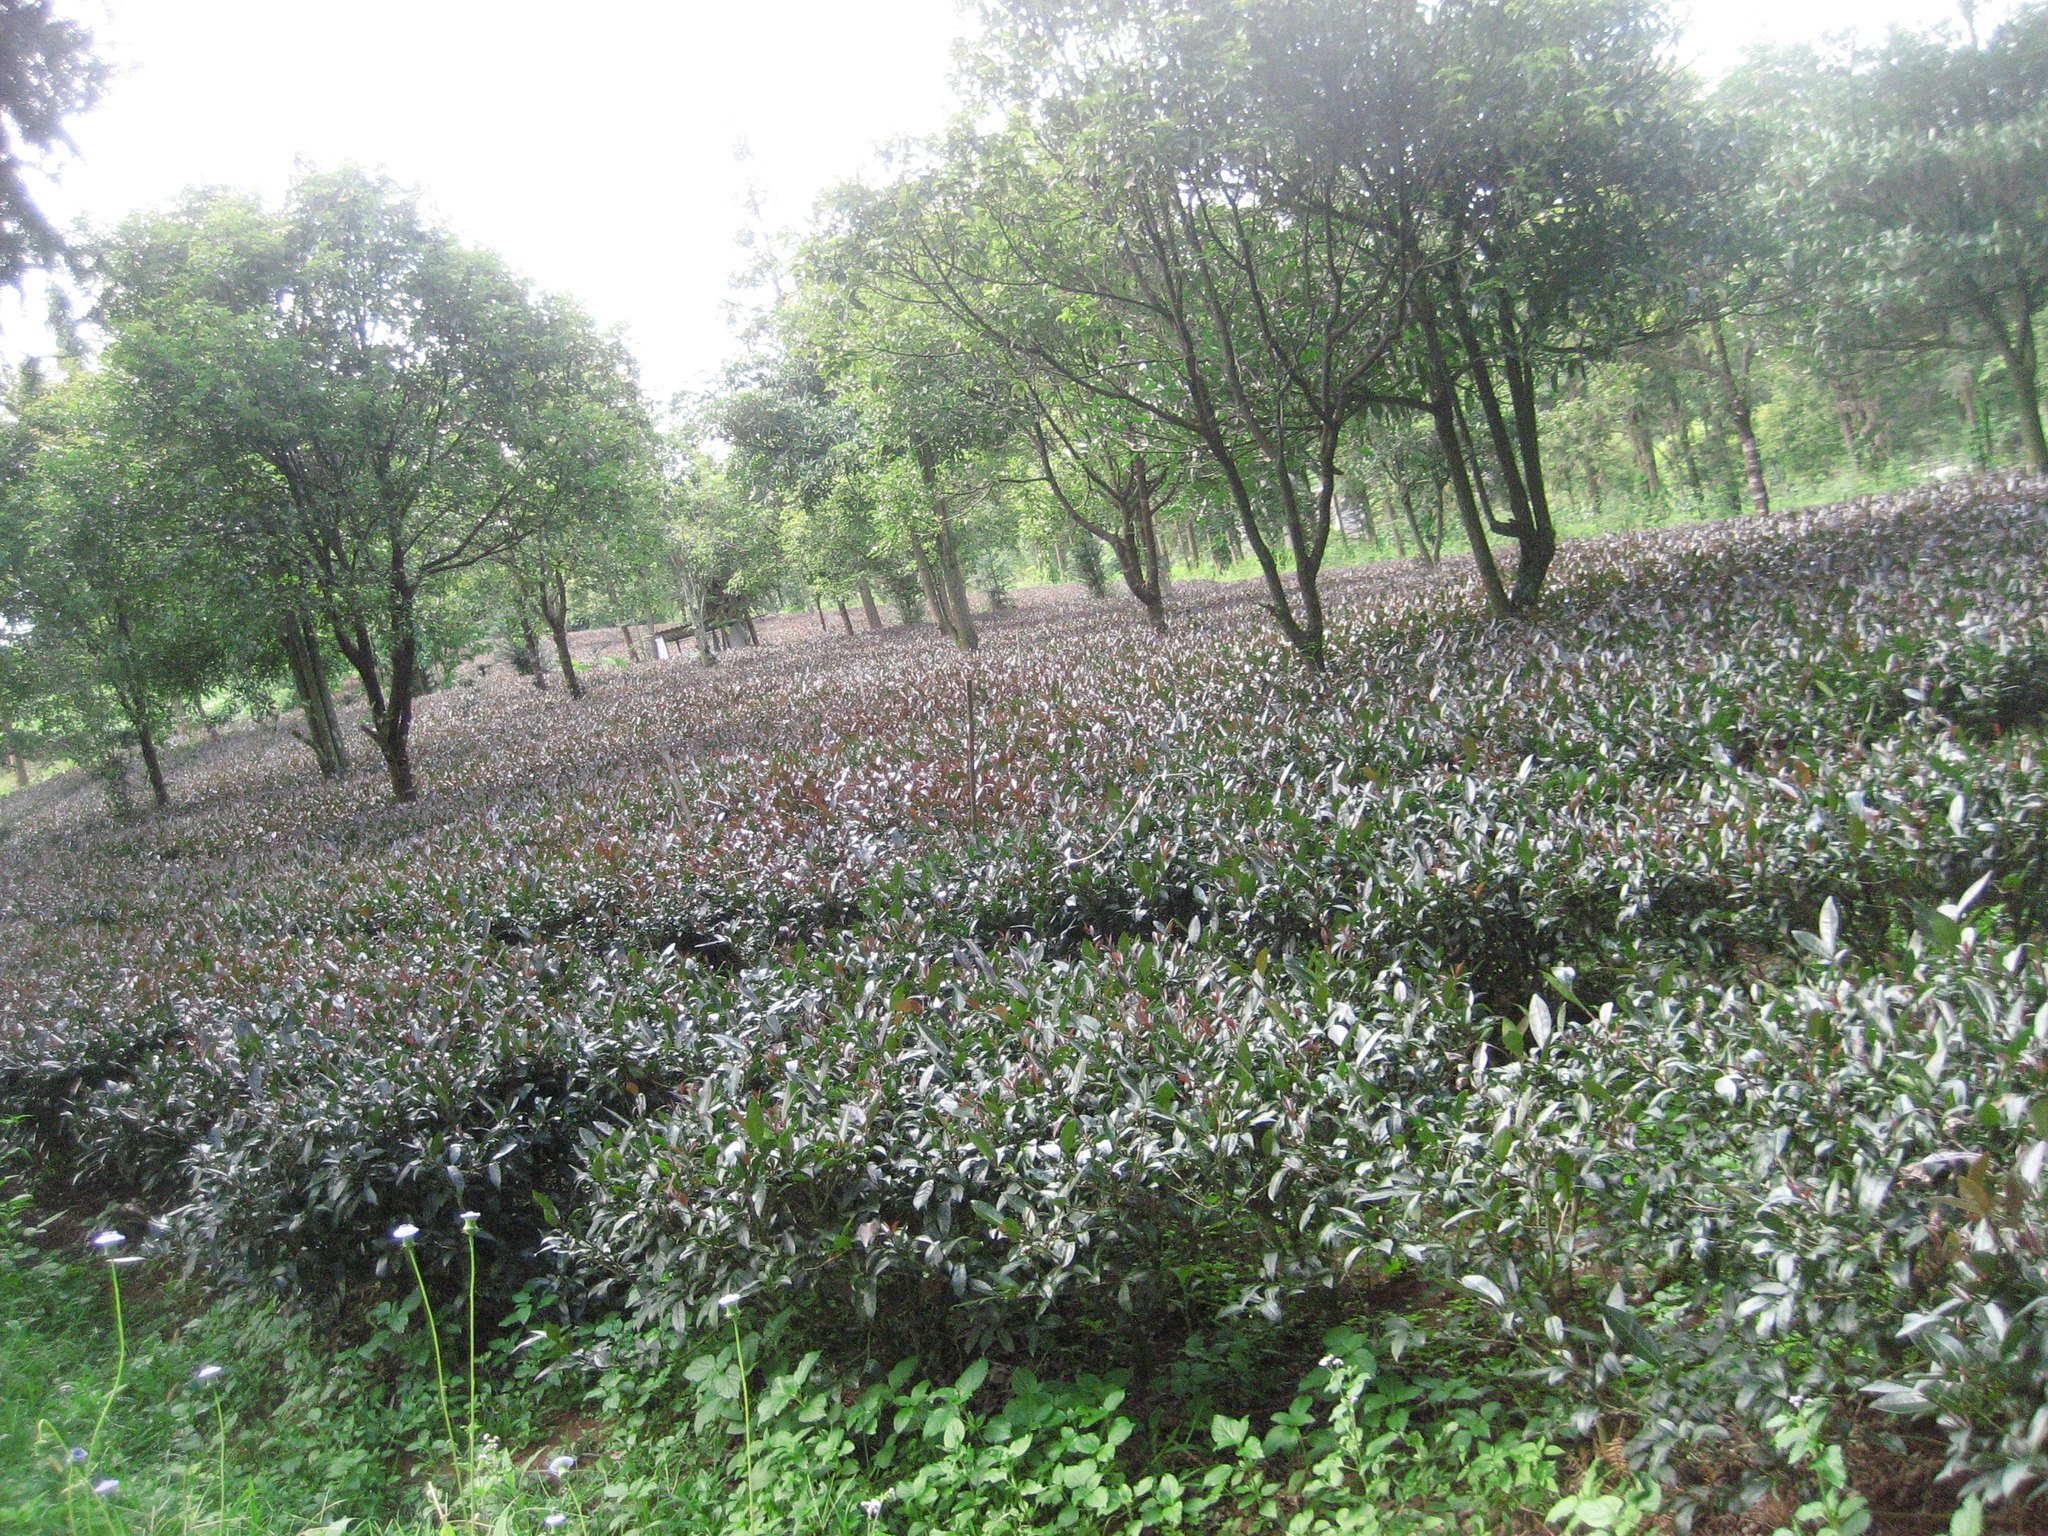 Tea Cultivated at the Yunnan Tea Research Institute